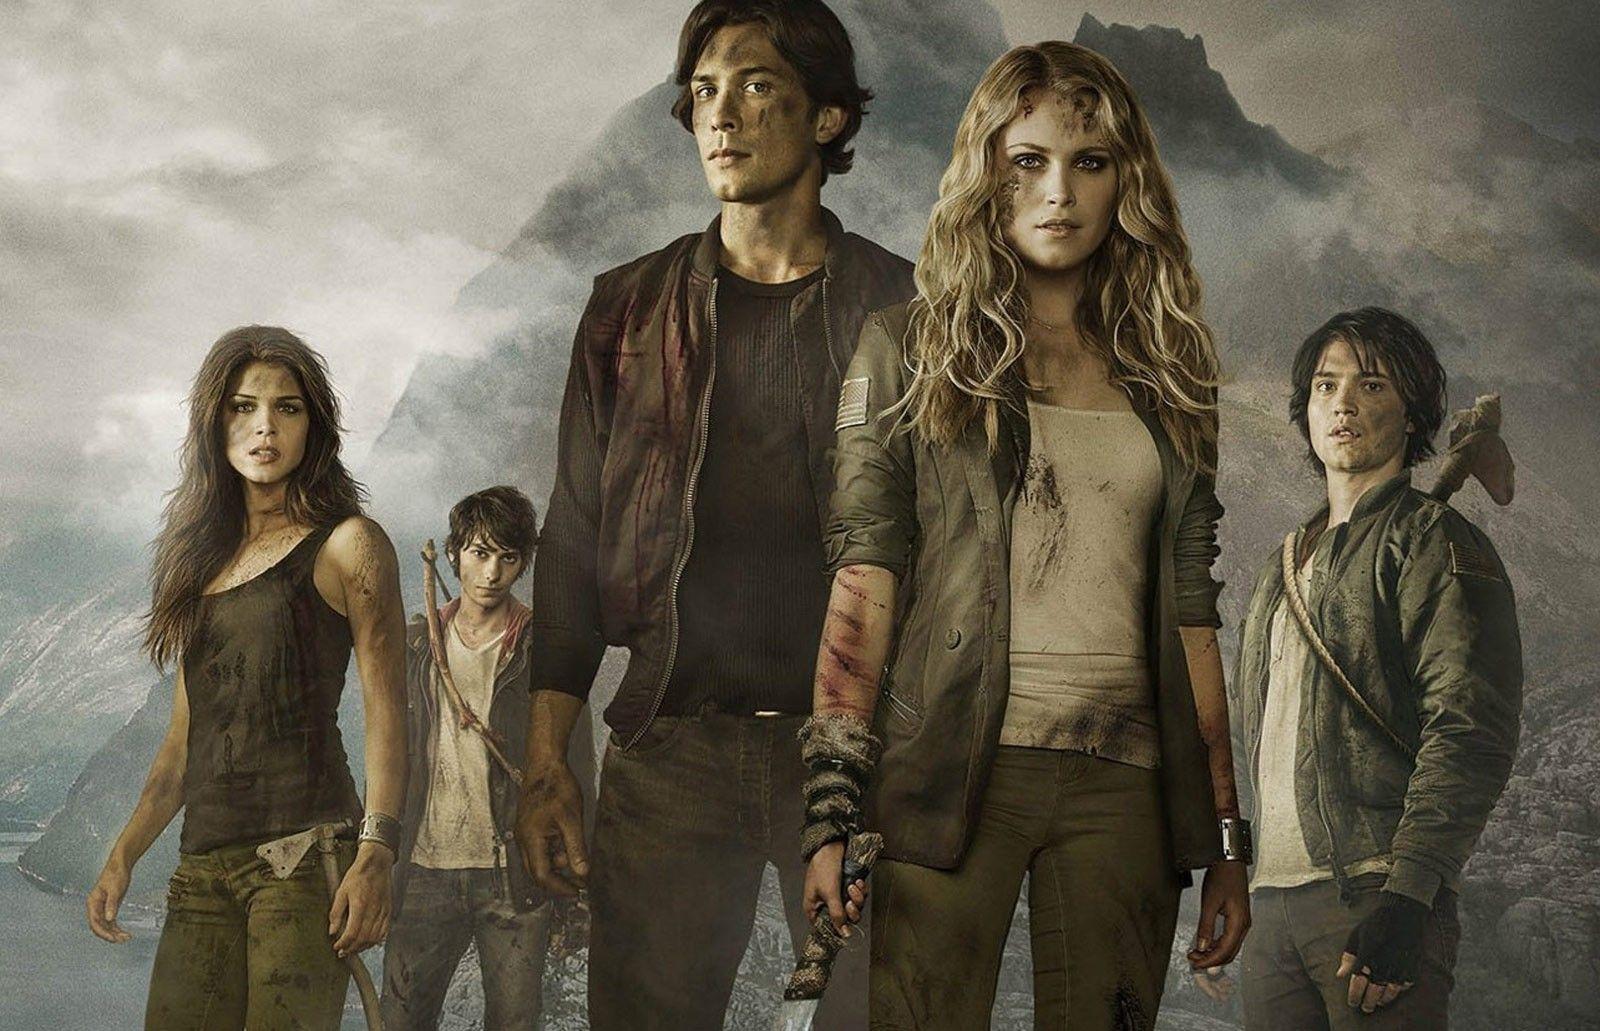 The 100 Season 7 CW Release Date and Trailer